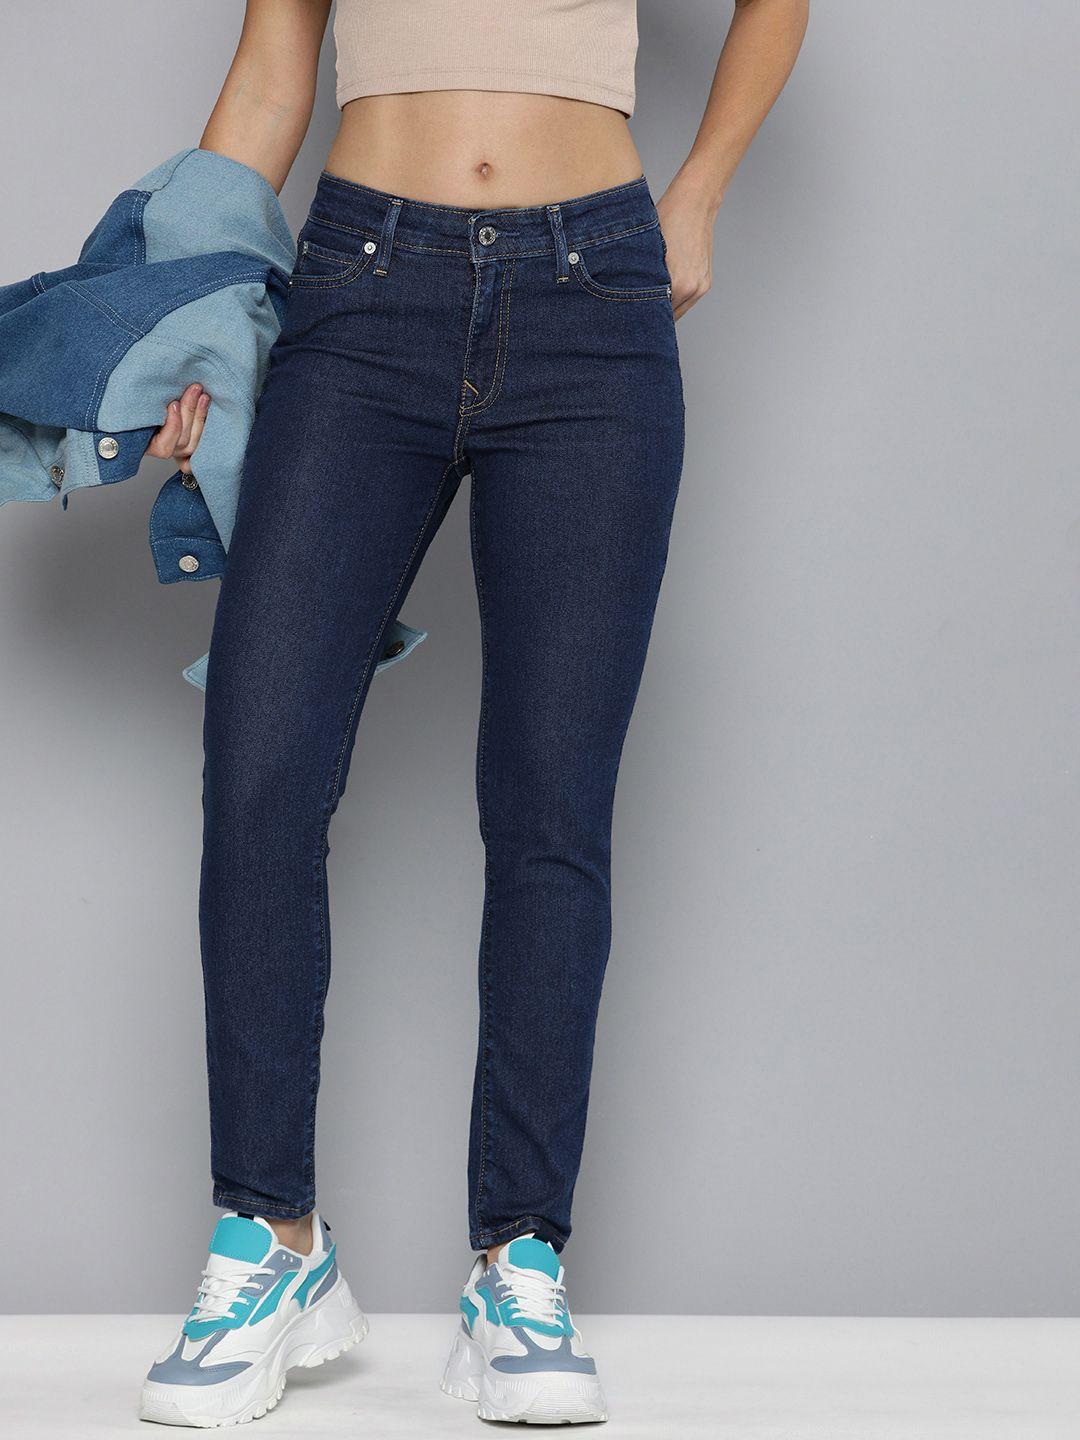 Levis Women 711 Skinny Fit Stretchable Jeans